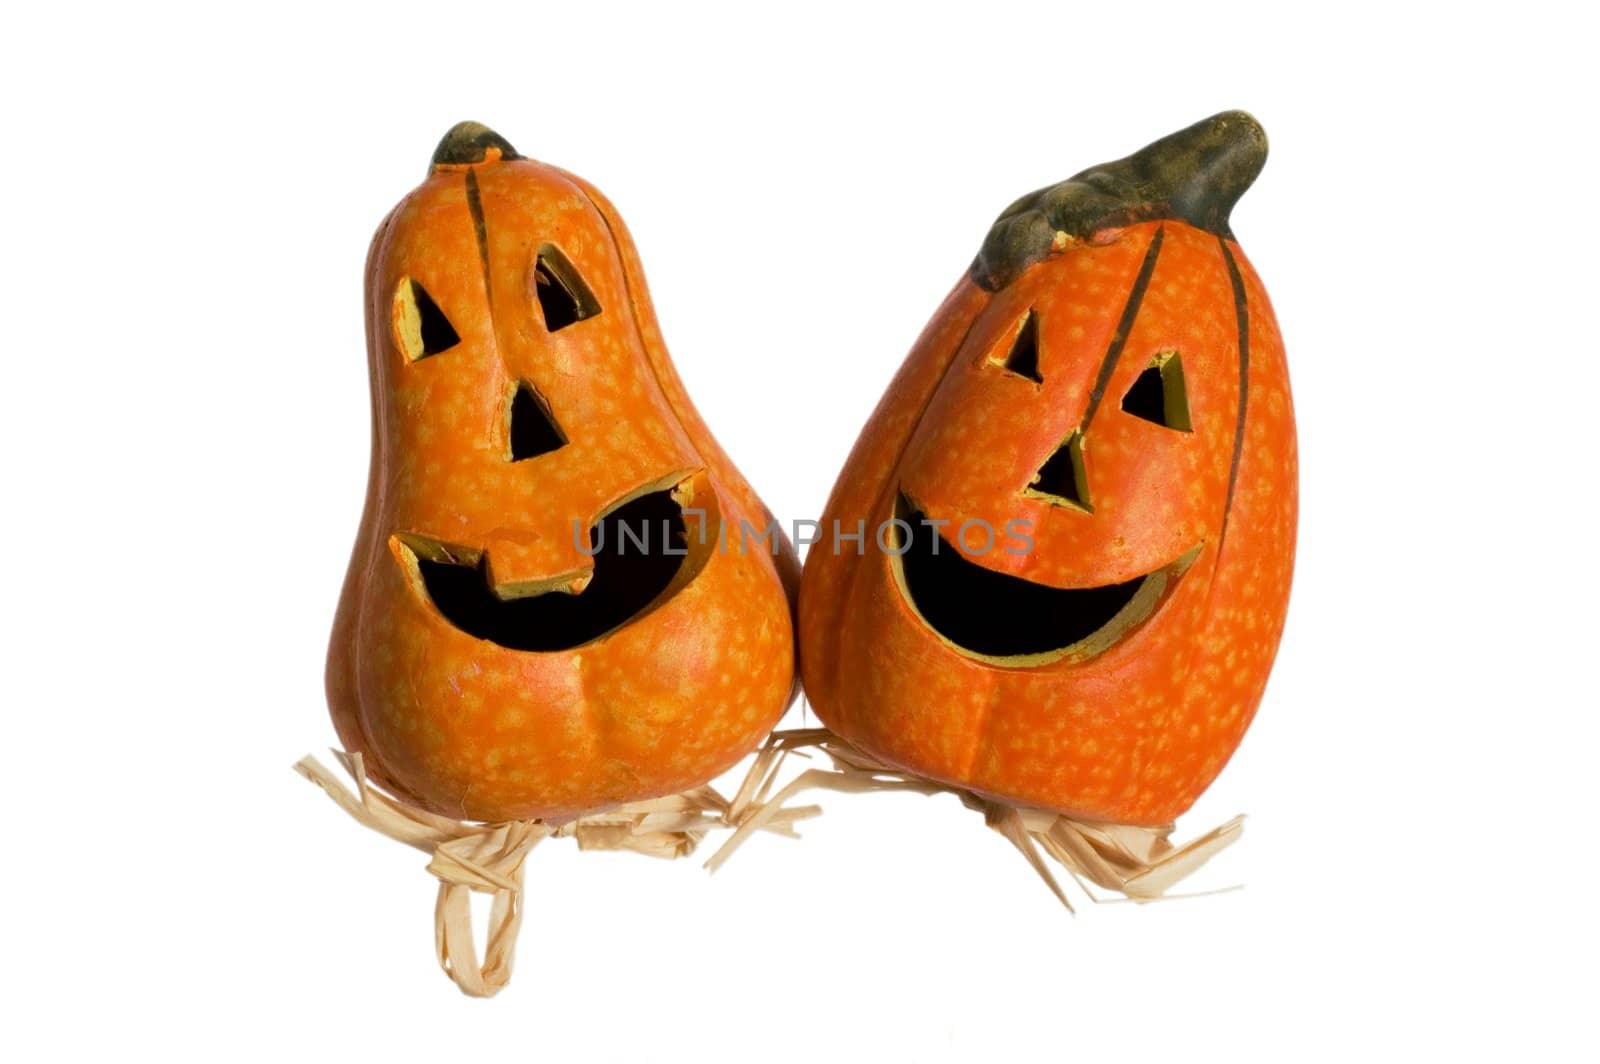 Two funny halloween pumpkins isolated on white